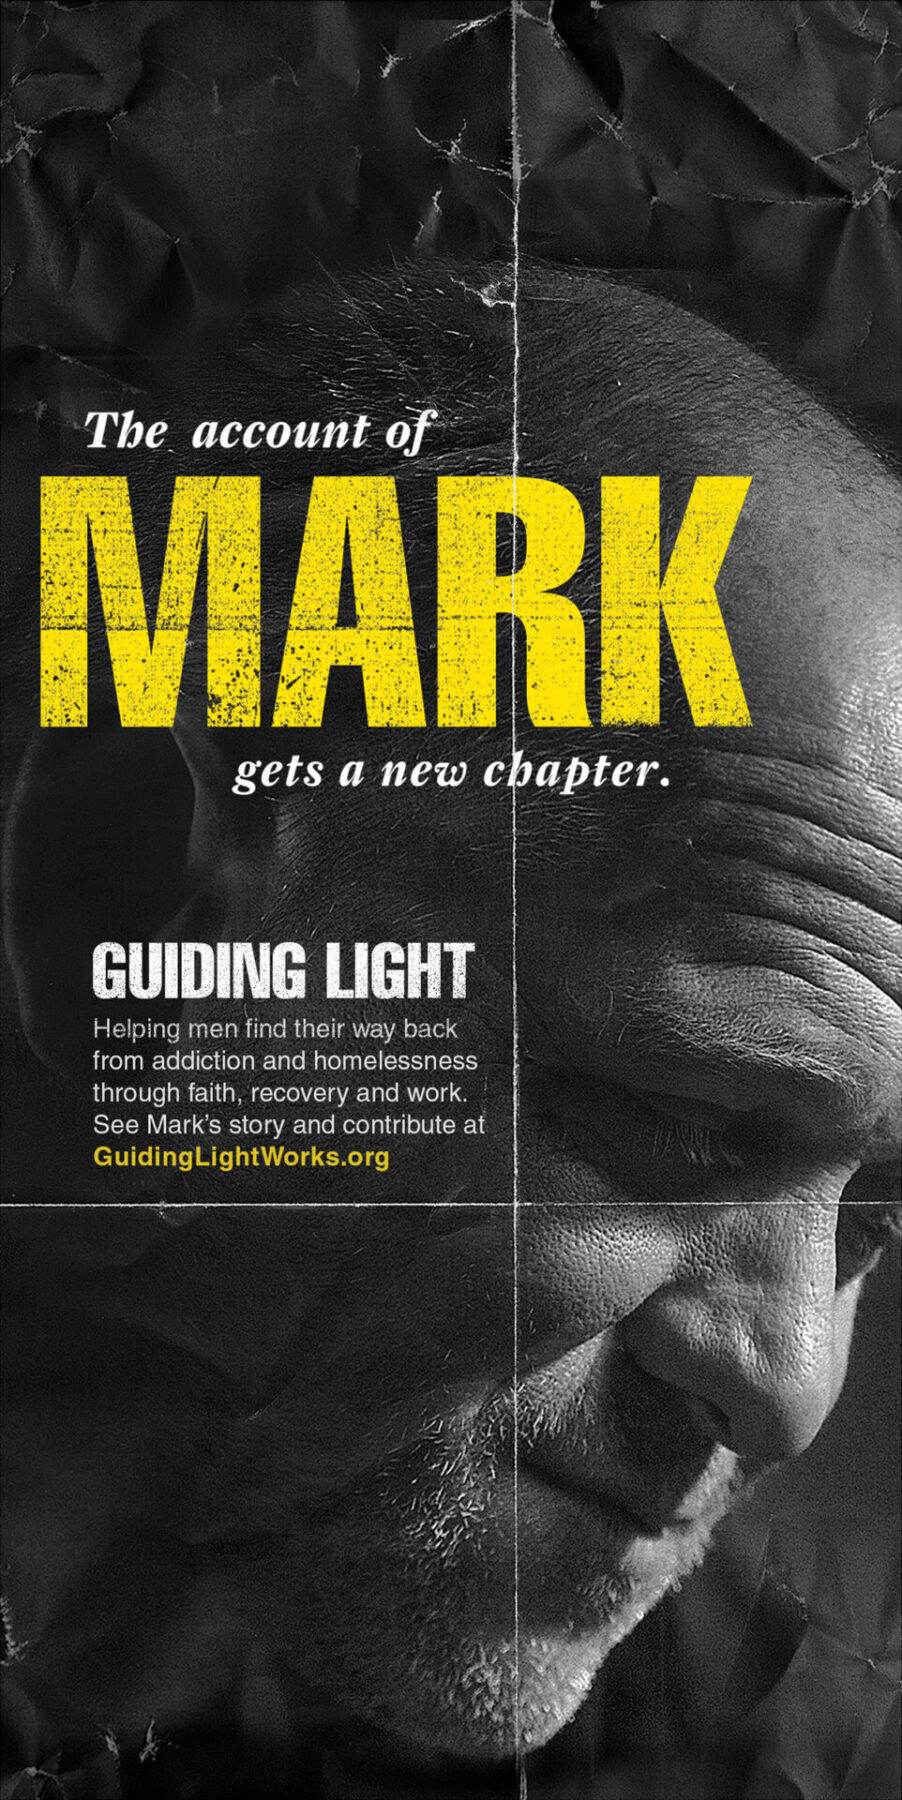 Out of home mall kiosk advertisement with closeup black and white photo of a man and the headline "The account of Mark gets a new chapter."